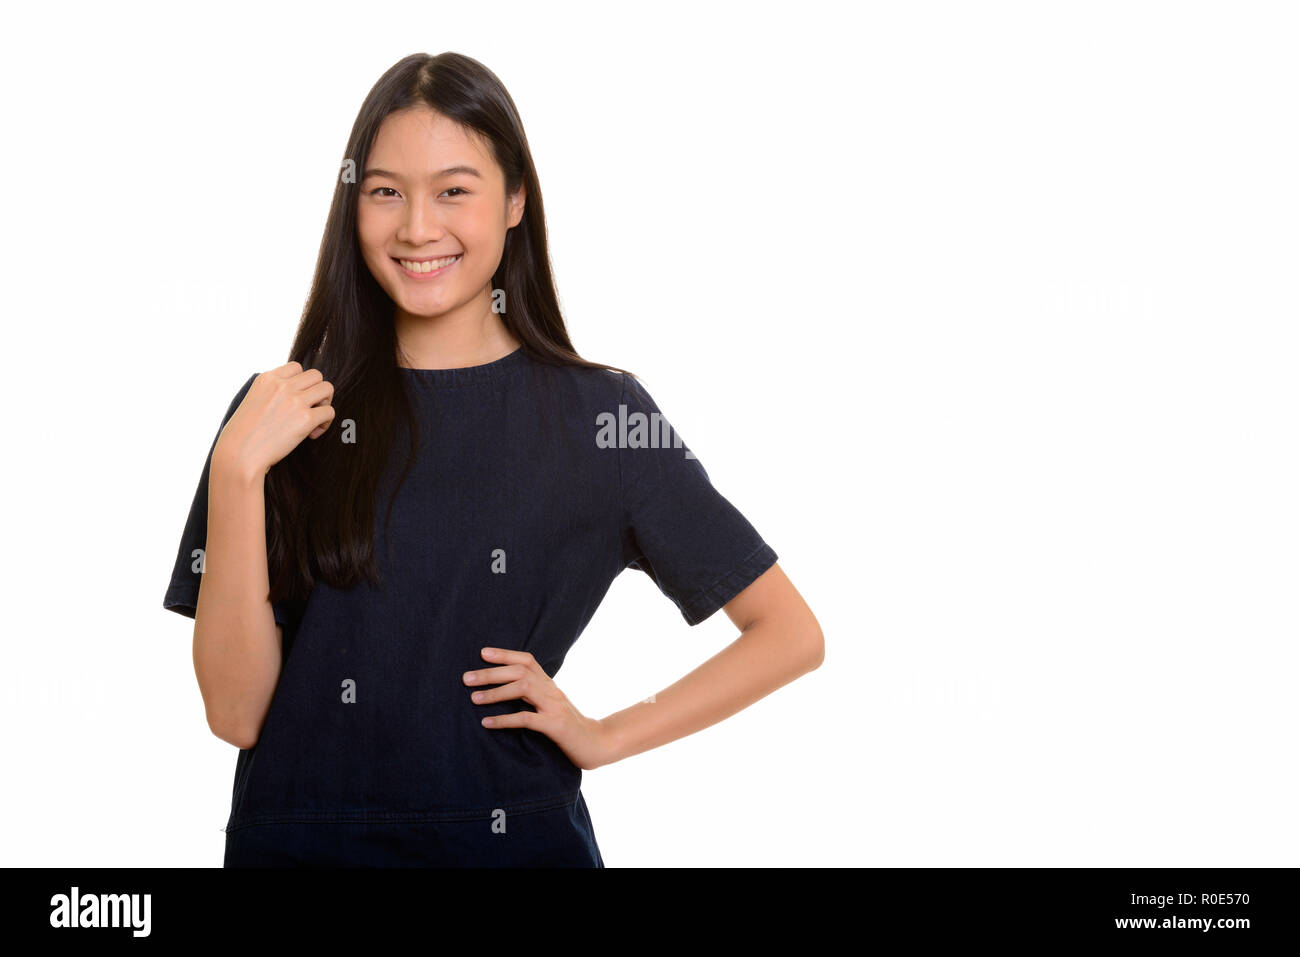 Portrait of young happy Asian teenage girl smiling Stock Photo